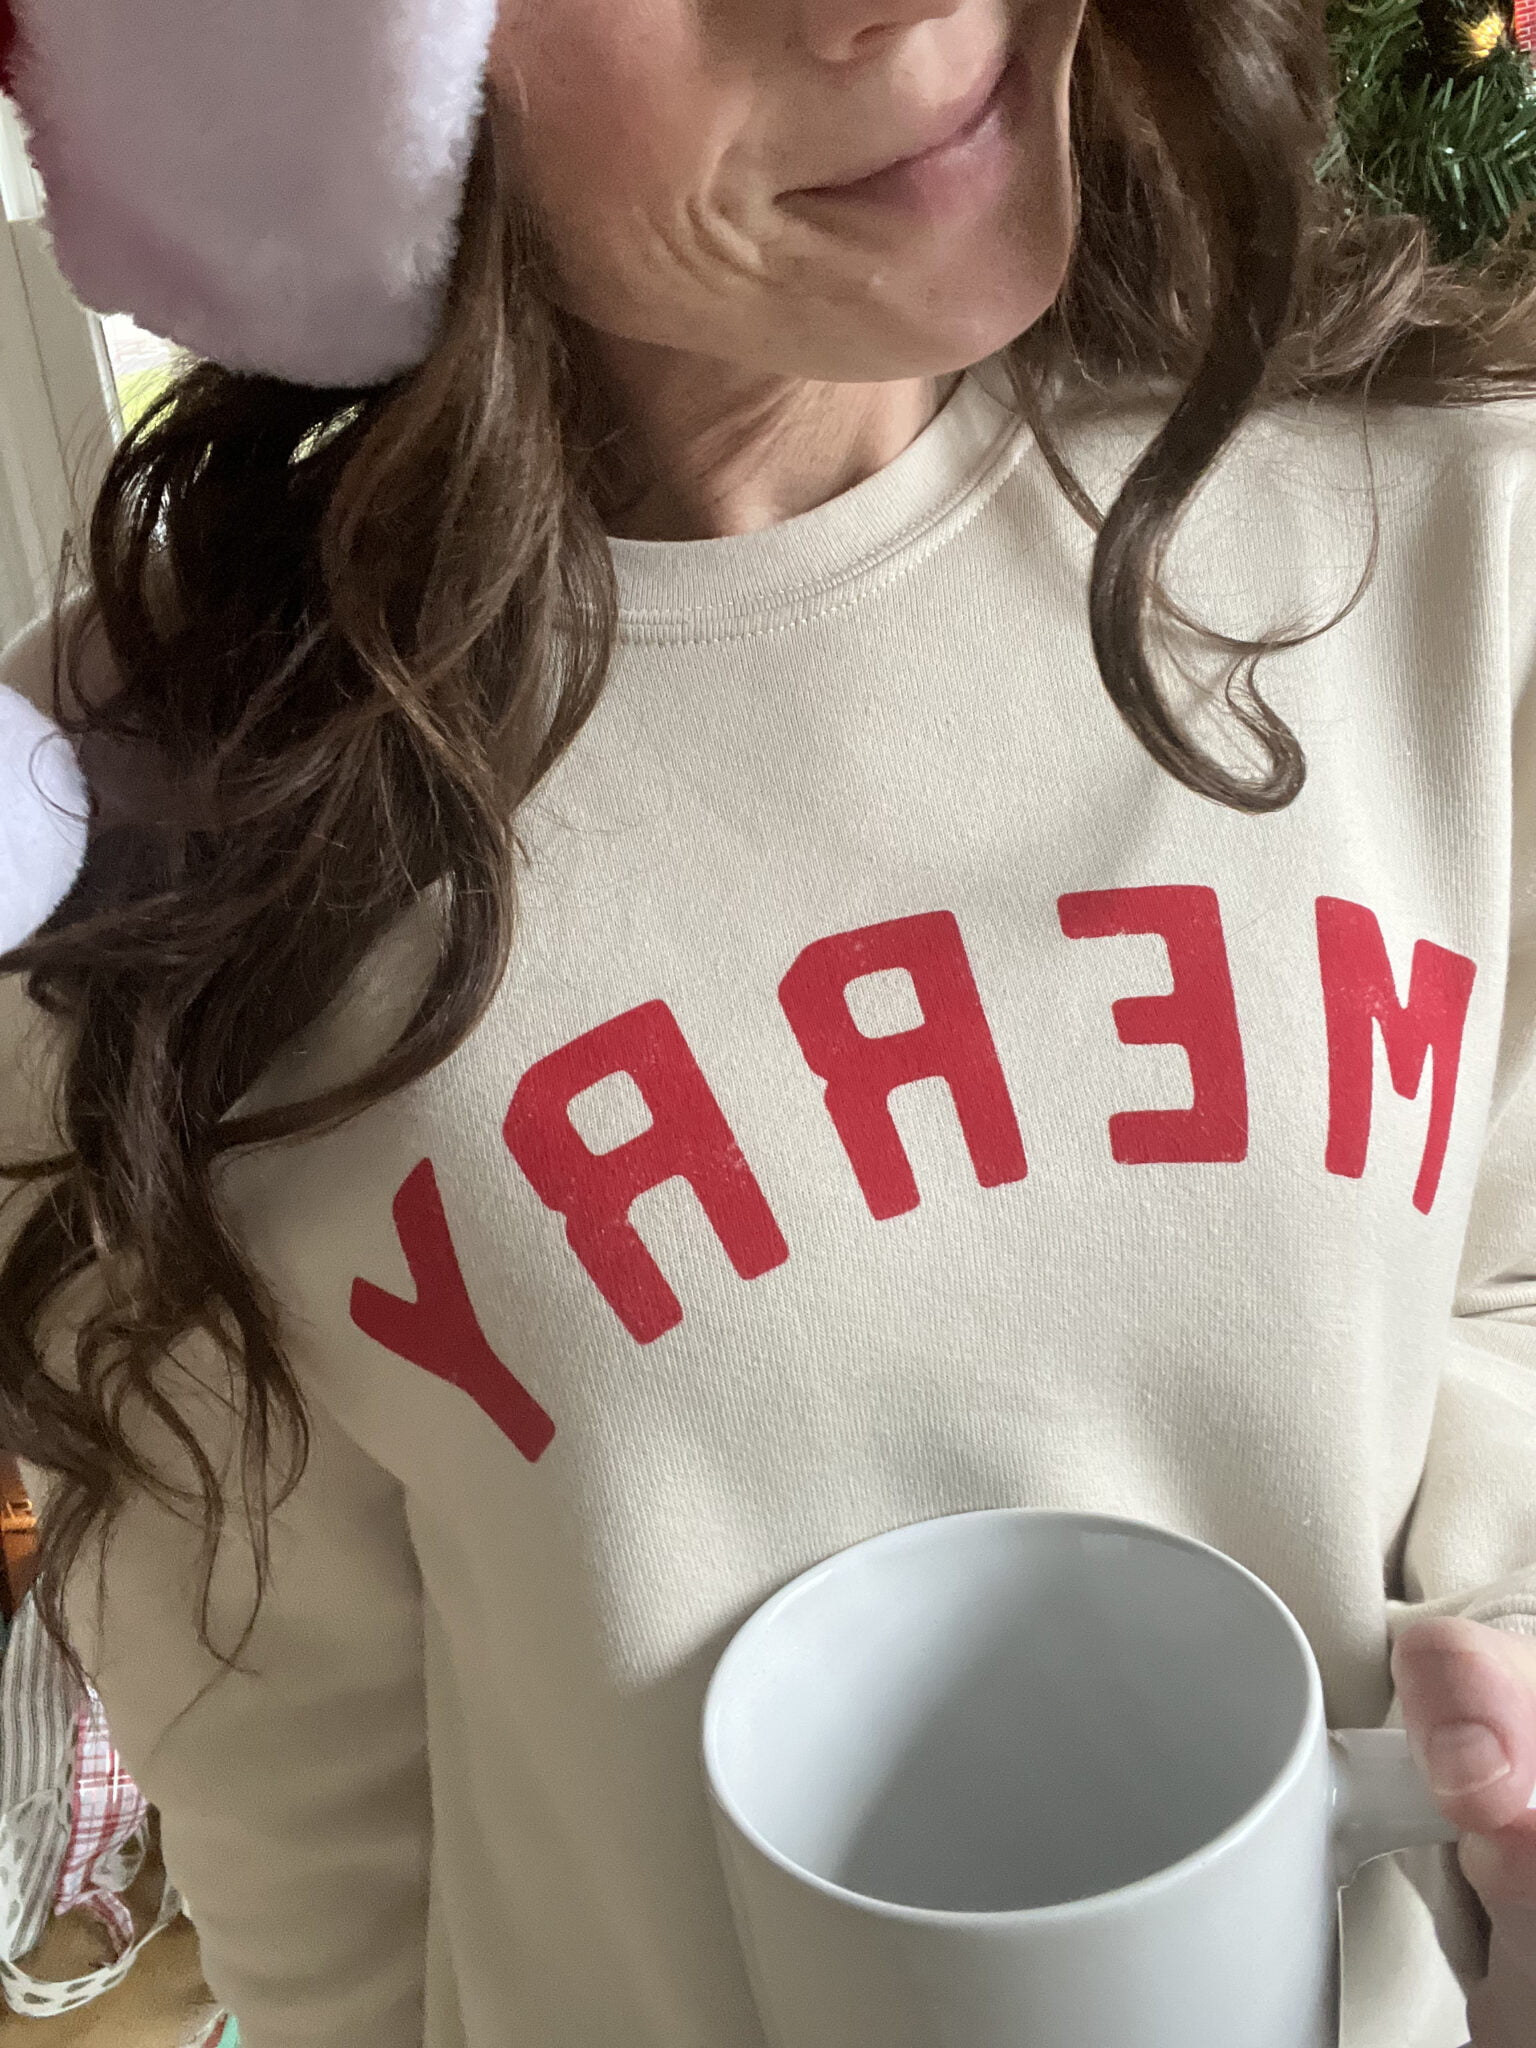 woman in merry sweatshirt with cup of coffee